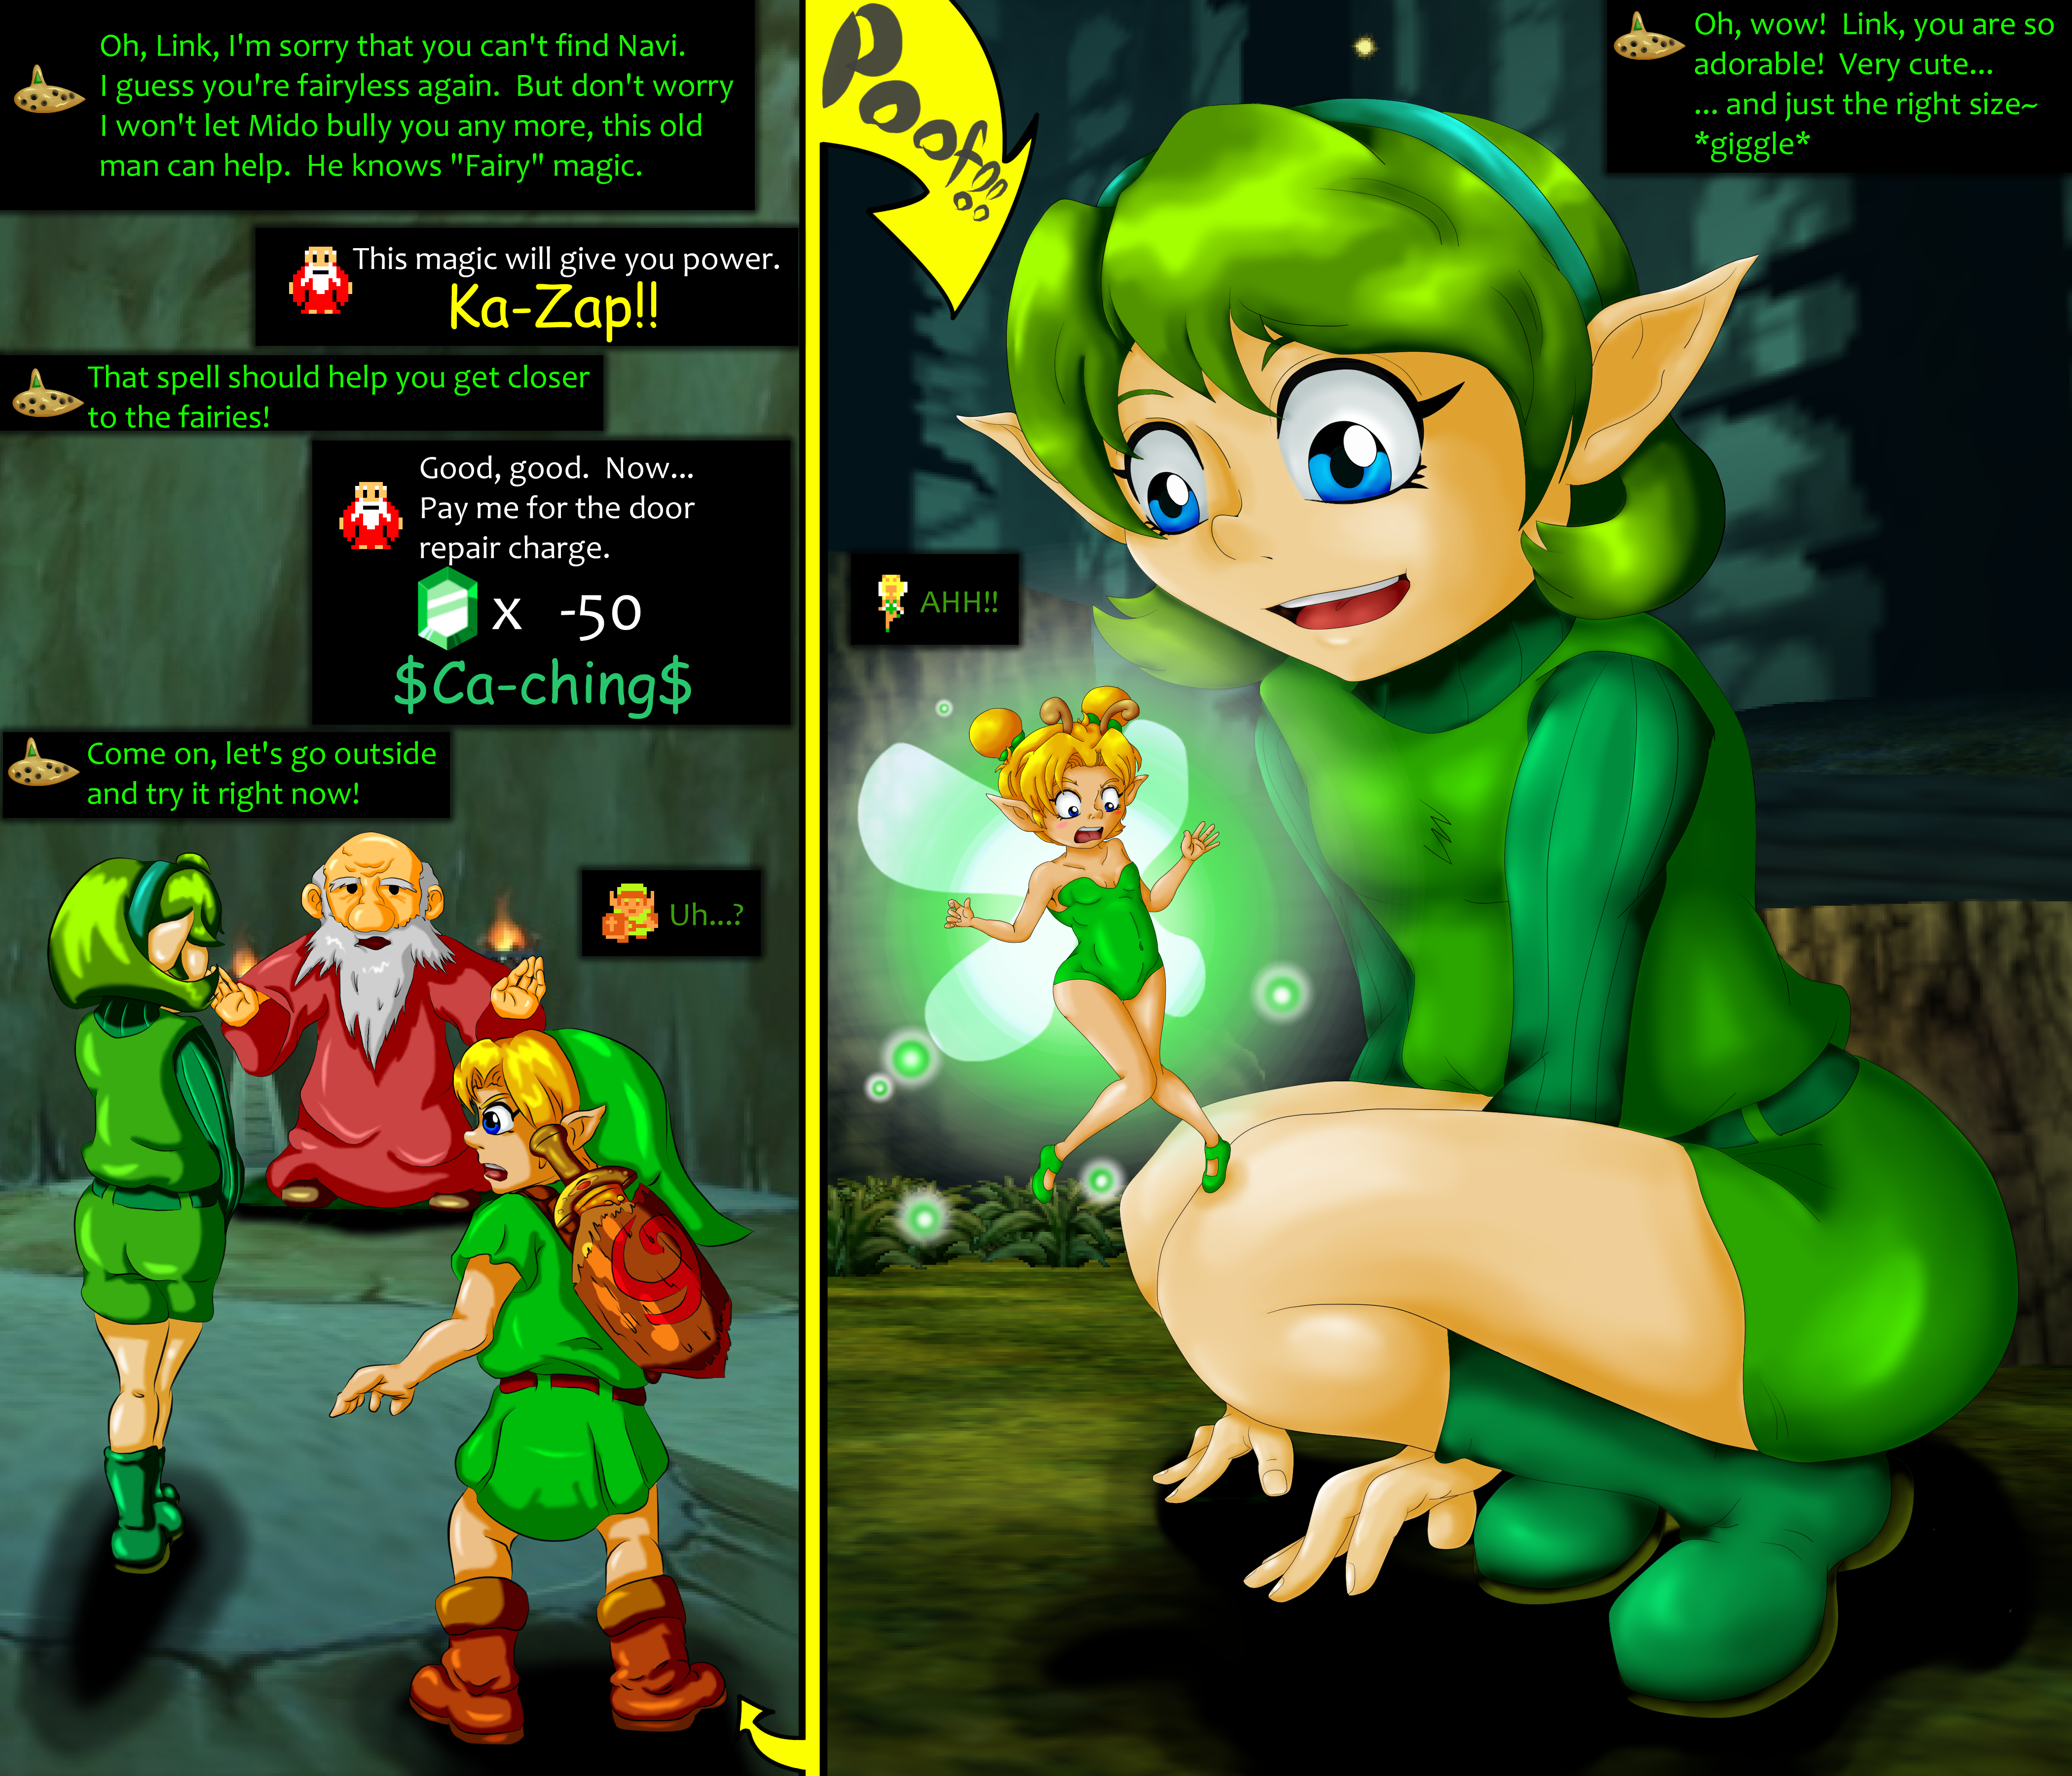 rika The Adventures of Fairy Link 866803 0001